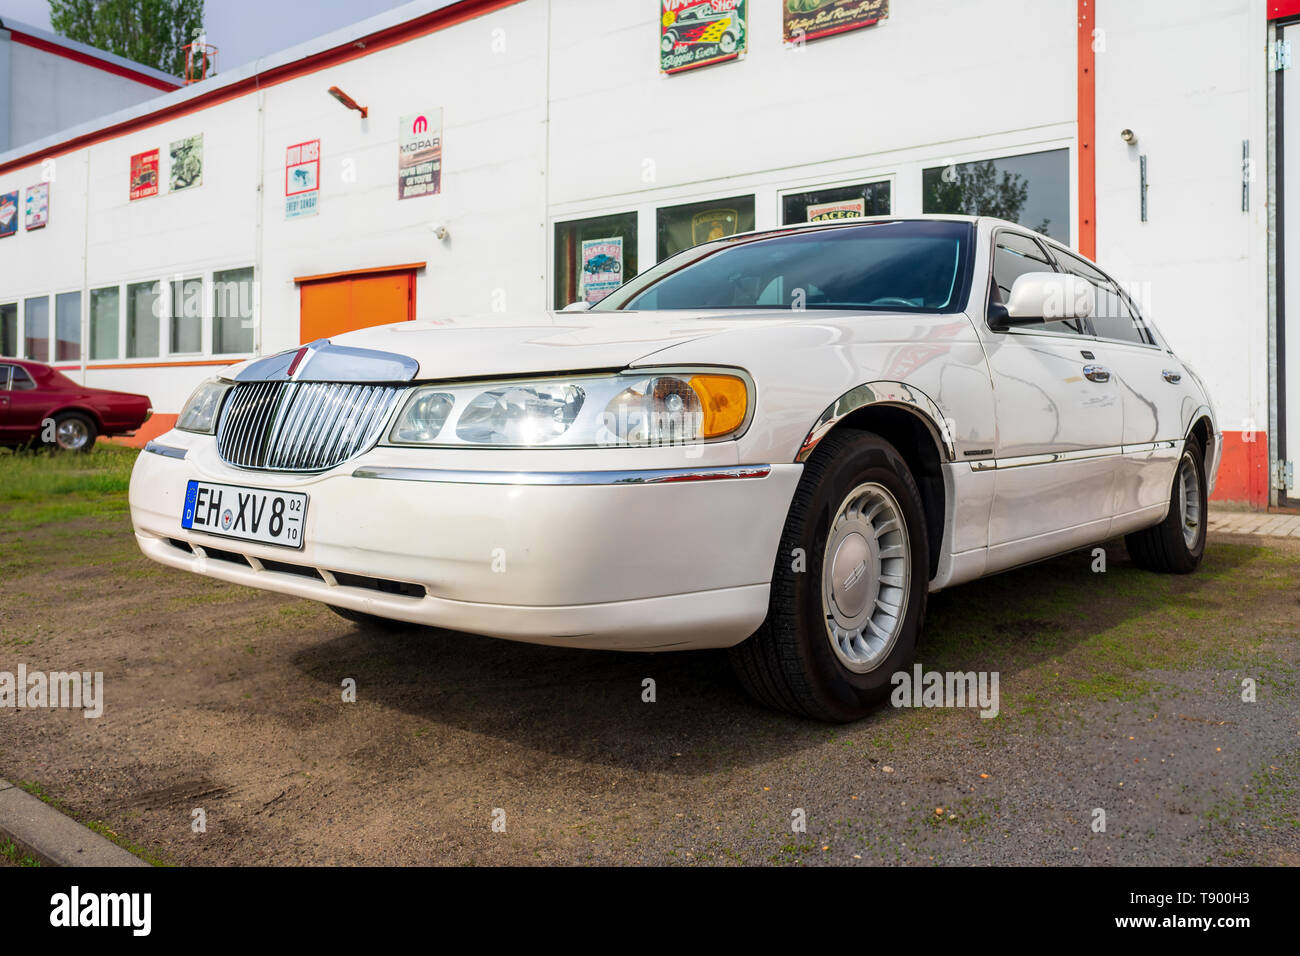 BERLIN - APRIL 27, 2019: Full-size luxury car Lincoln Town Car (third generation) Stock Photo